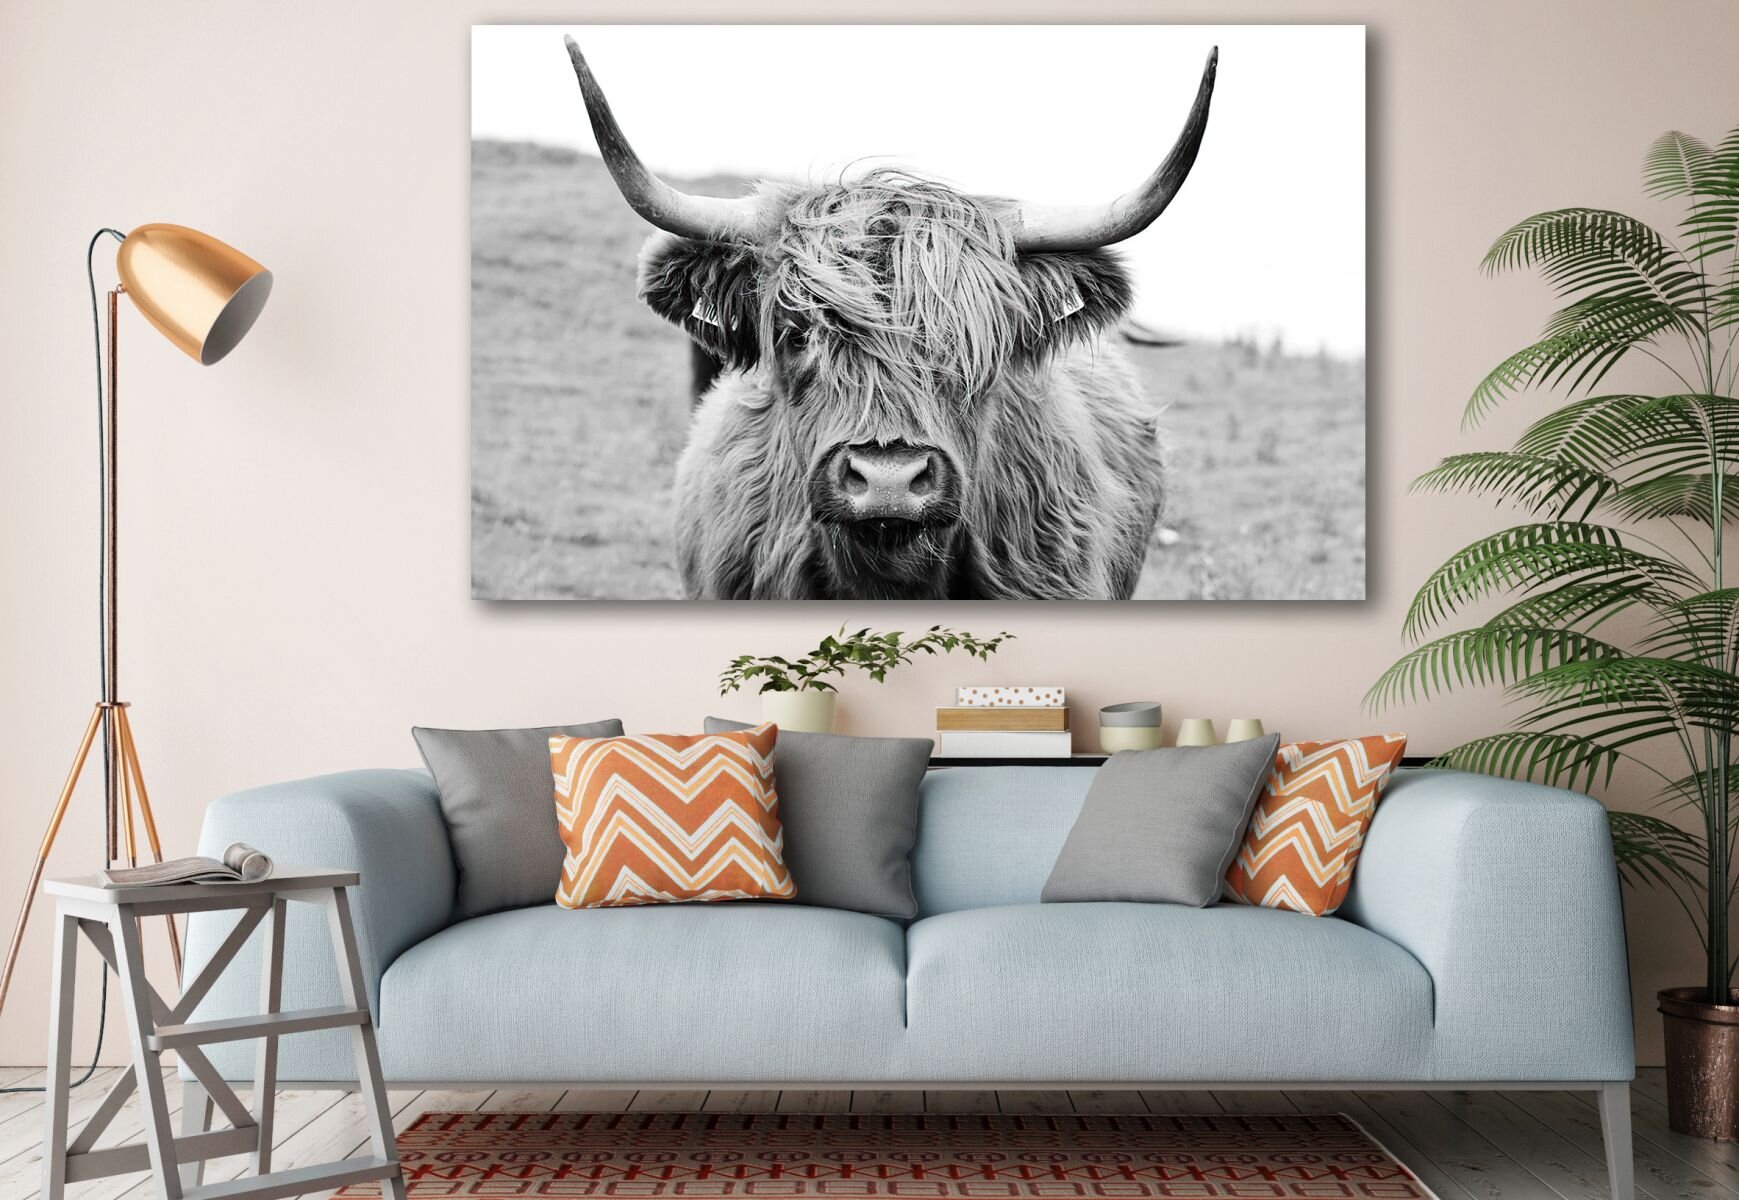 Realistic Cow Print Fabric, Wallpaper and Home Decor